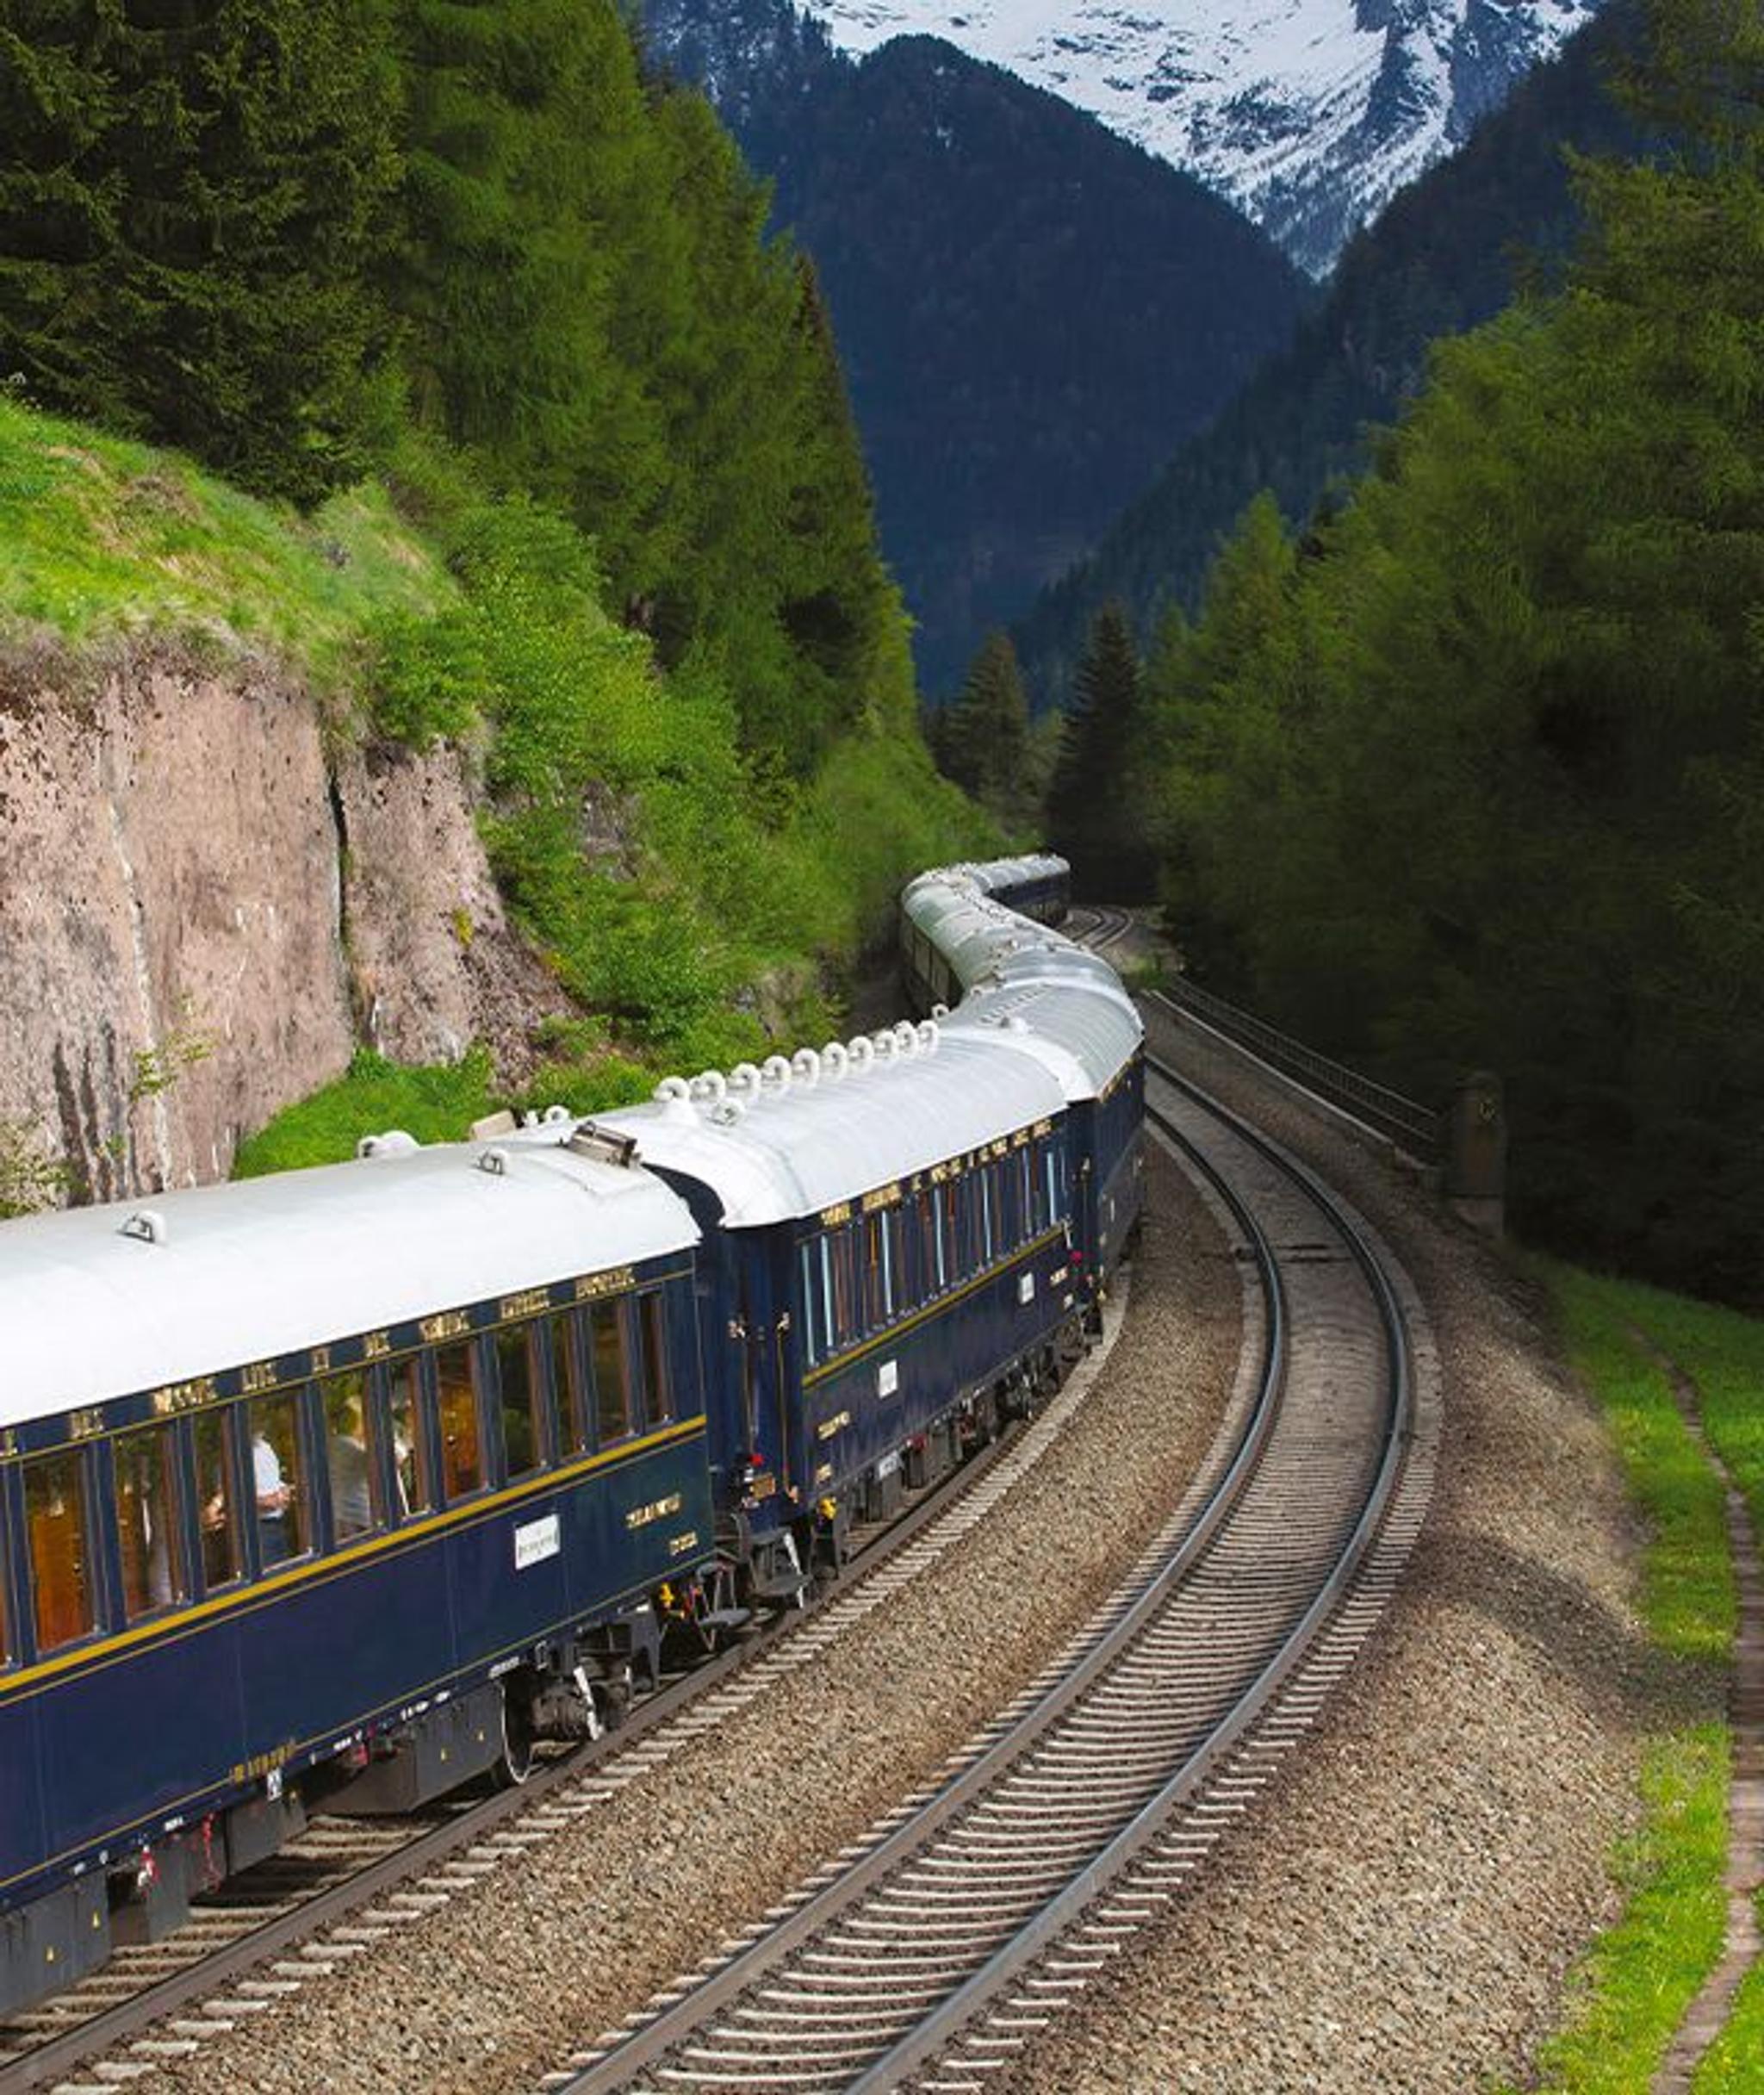 Timeless luxury: All aboard the Venice Simplon Orient Express